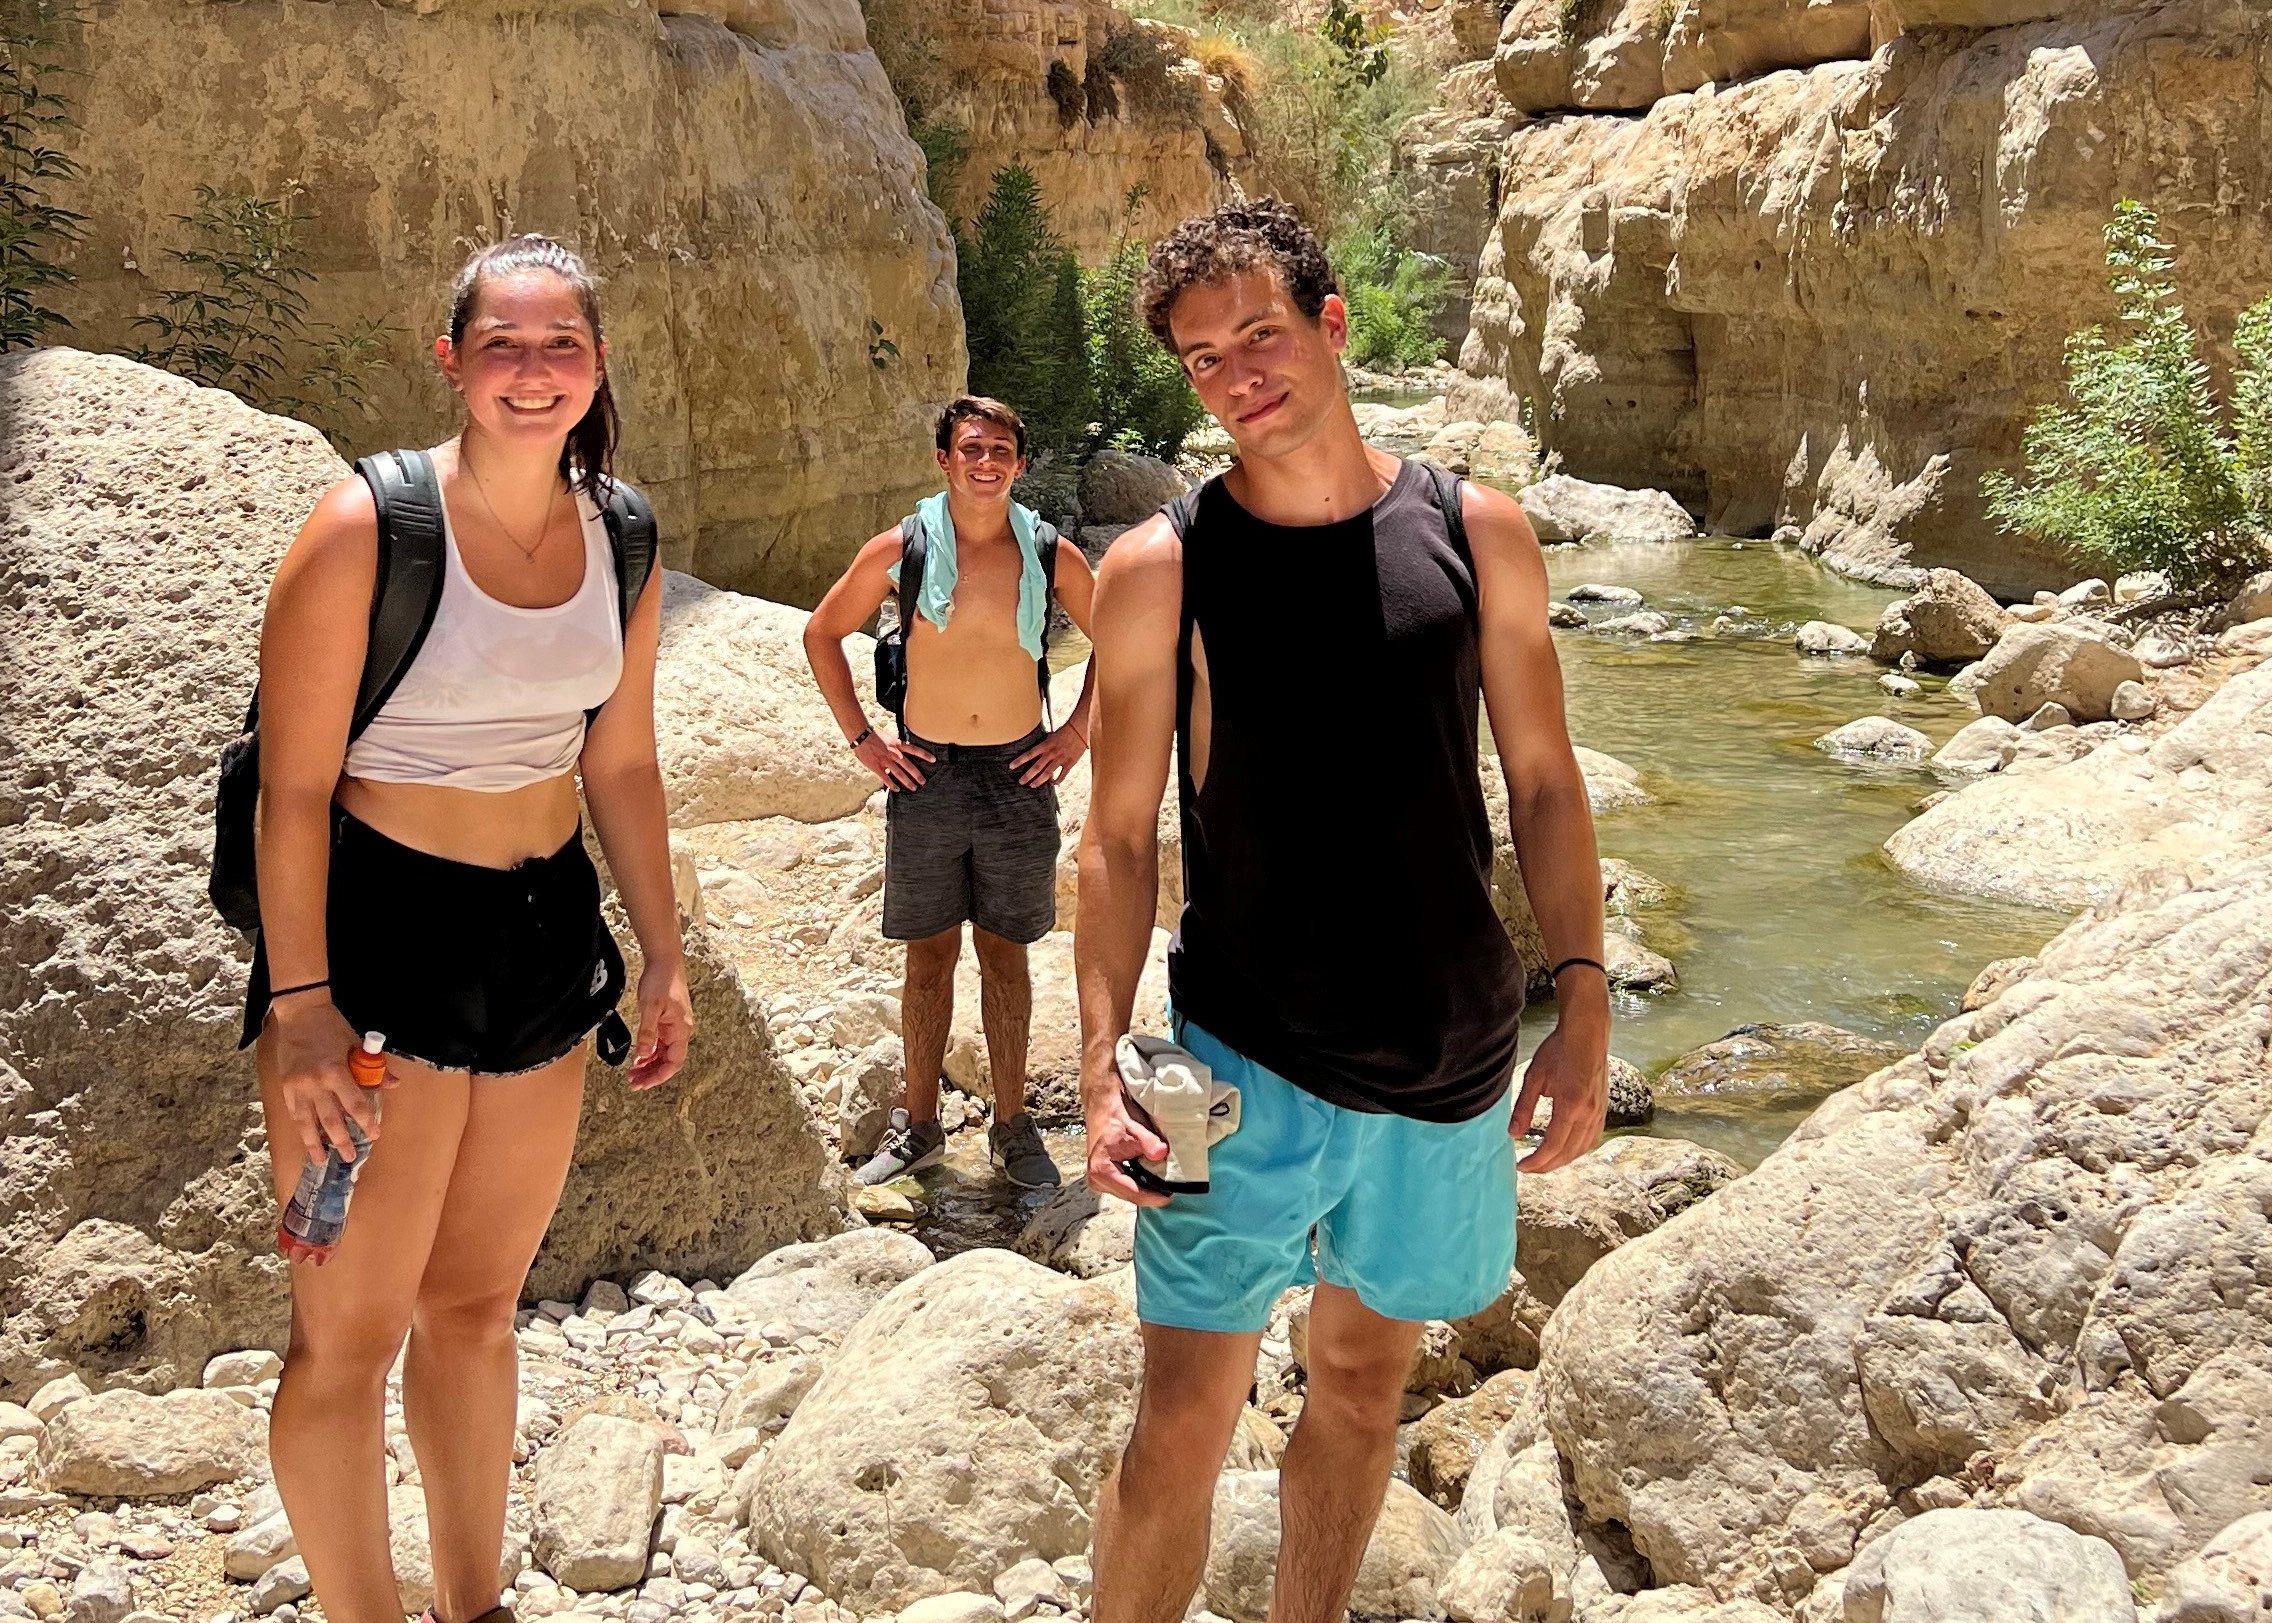 Pic of Ravid Inbar hiking in Israel with friends